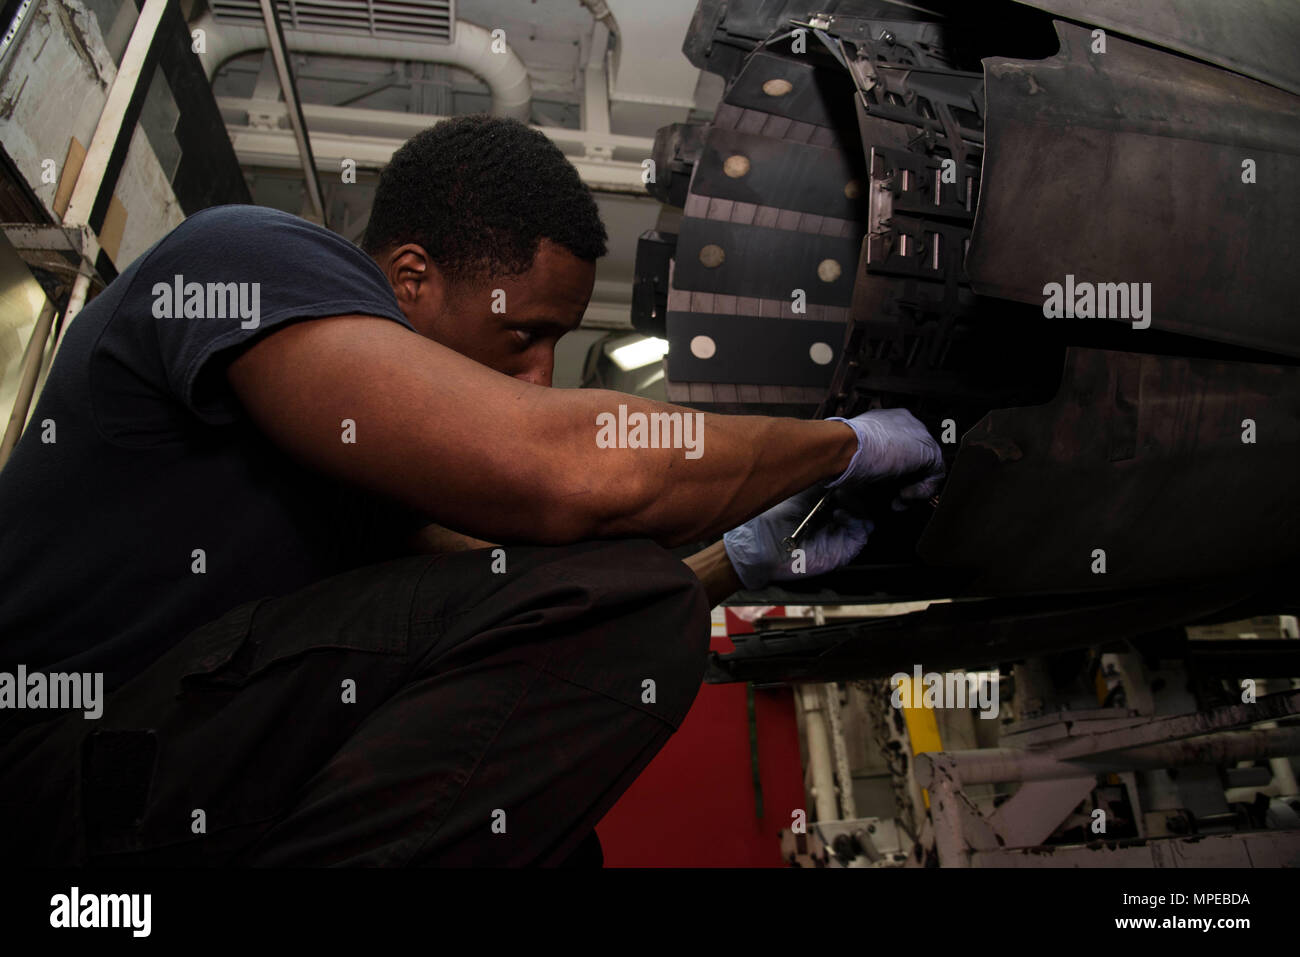 170211-N-KJ380-078  ATLANTIC OCEAN (Feb. 11, 2017) Aviation Machinist's Mate Airman Trevaughn Whiteman, from Windsor, Conn., conducts maintenance on an afterburner of an F/A-18 Super Hornet engine in the jet shop of the aircraft carrier USS Dwight D. Eisenhower (CVN 69) (Ike). Ike is currently conducting aircraft carrier qualifications during the sustainment phase of the Optimized Fleet Response Plan (OFRP). (U.S. Navy photo by Mass Communication Specialist Seaman Neo Greene III) Stock Photo